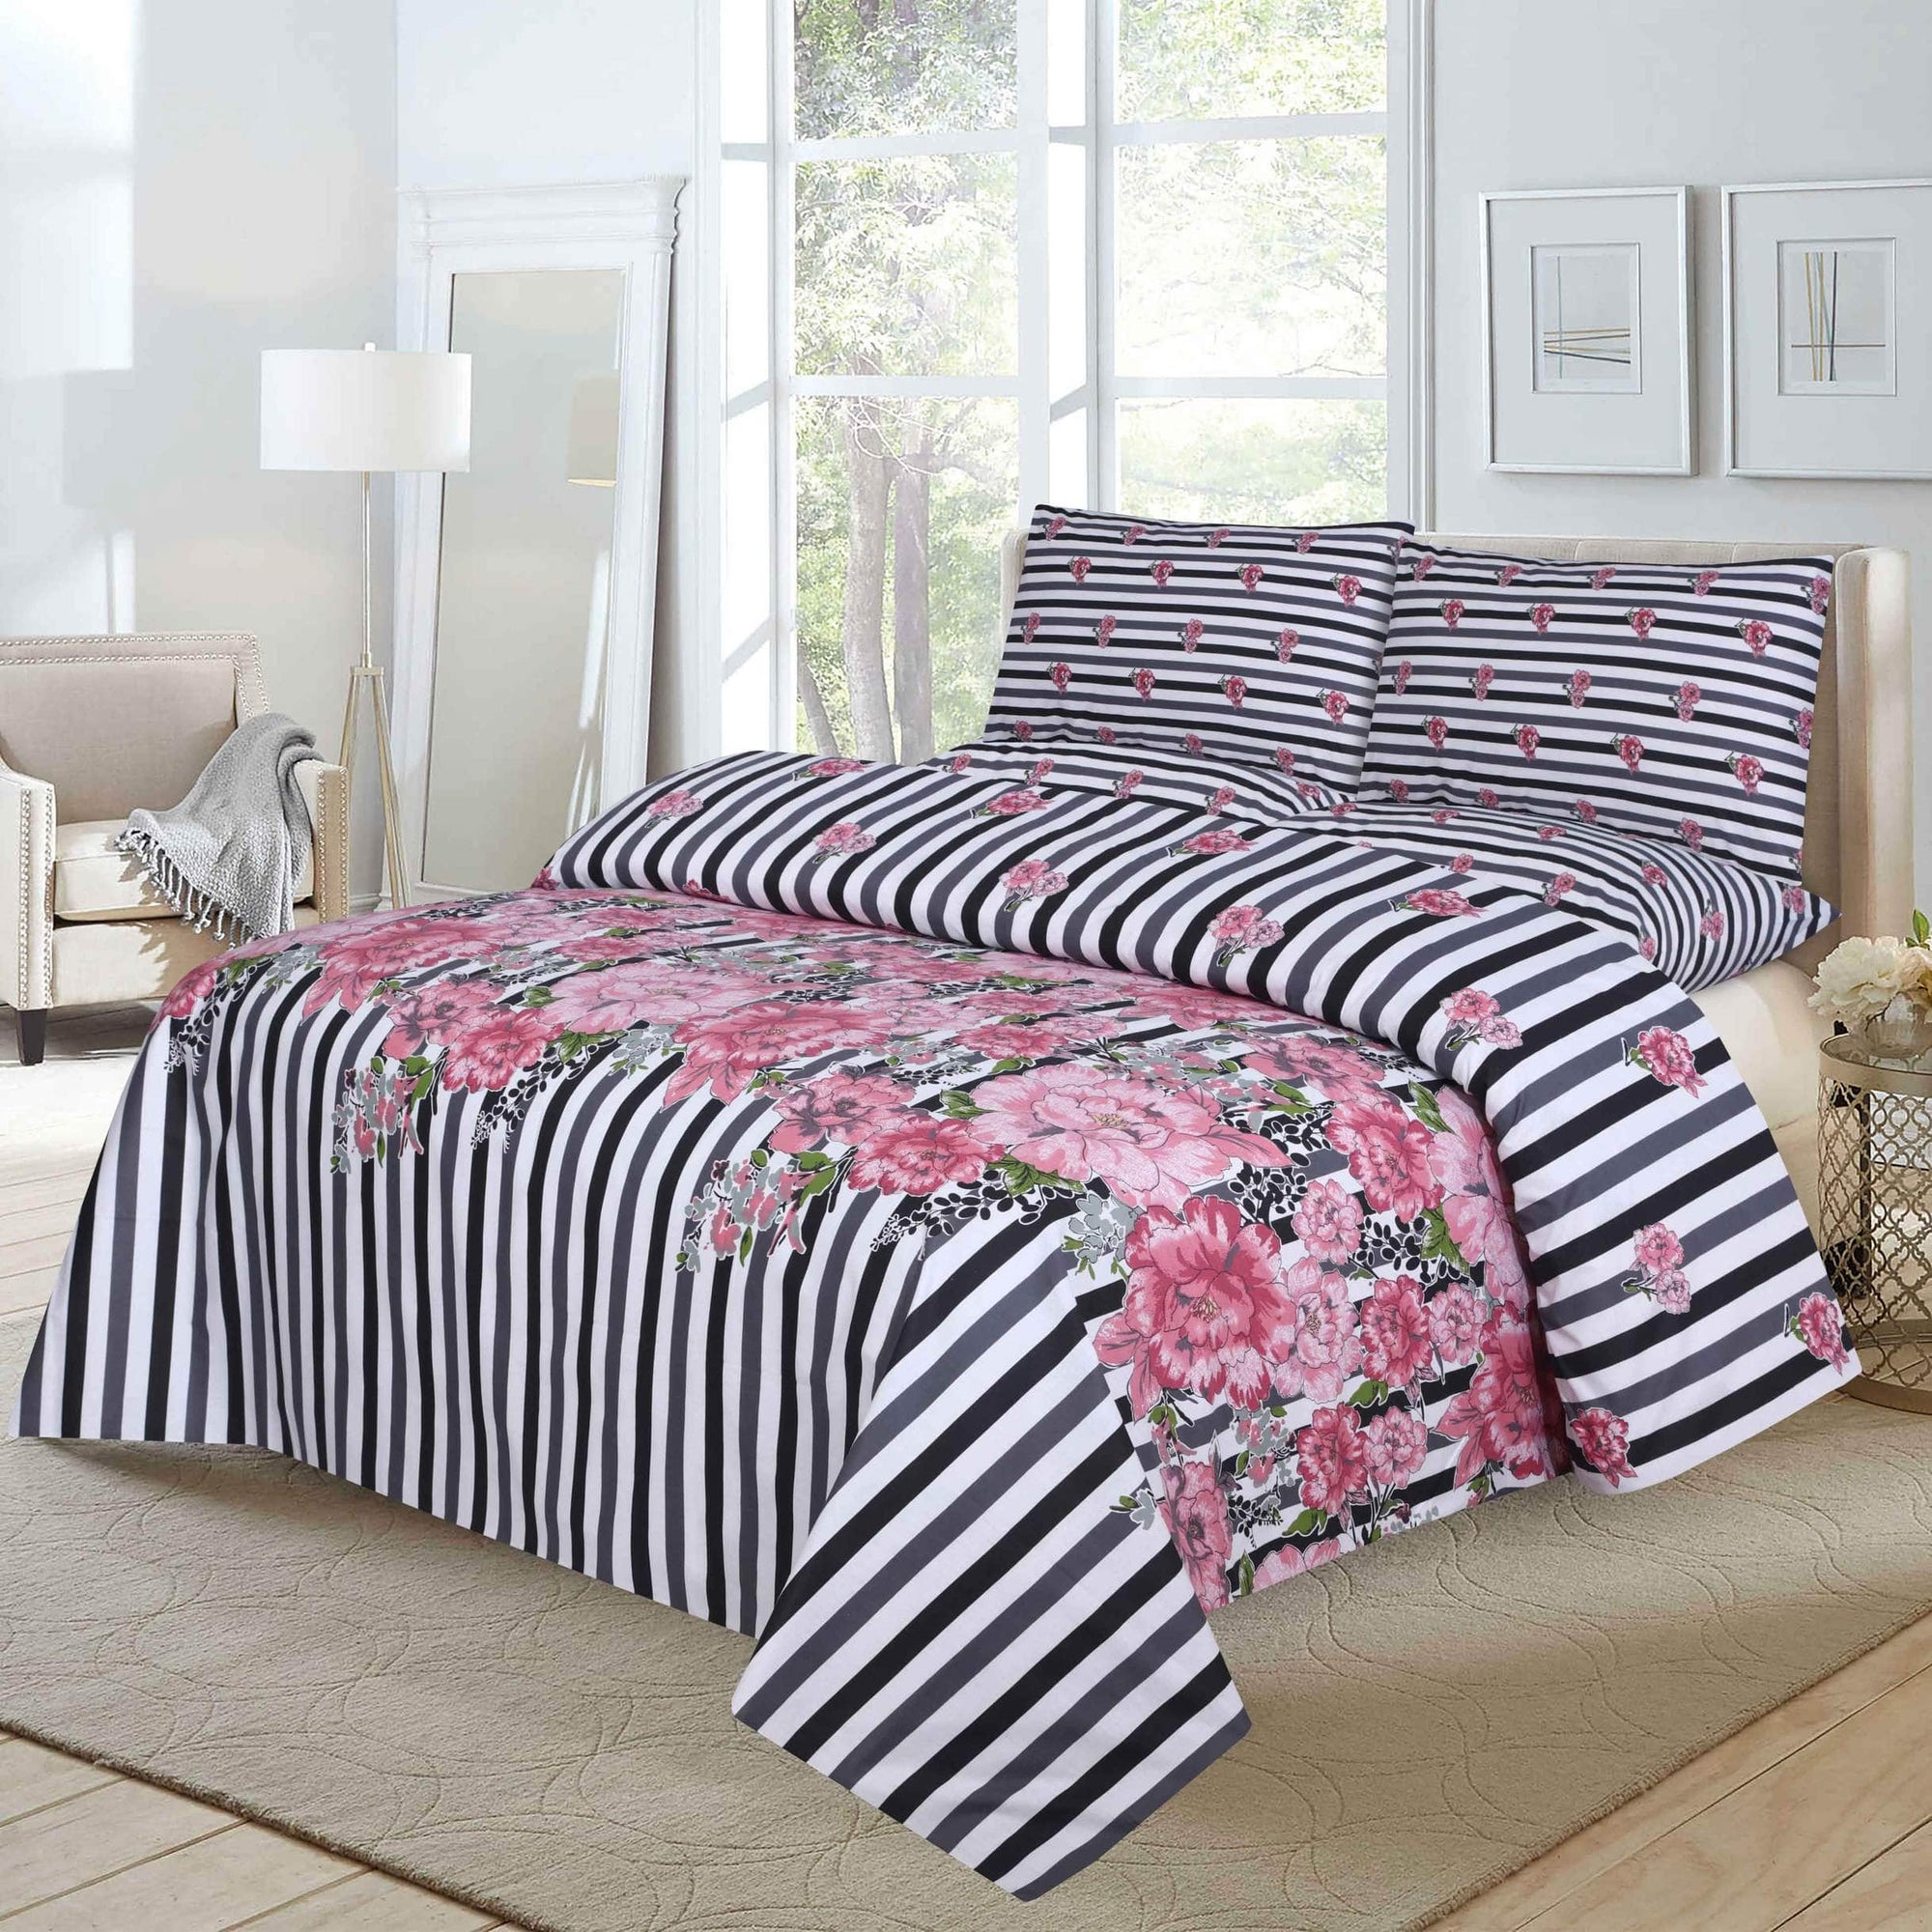 Grace D764- 6 pc summer Comforter Set with 4 pillow covers